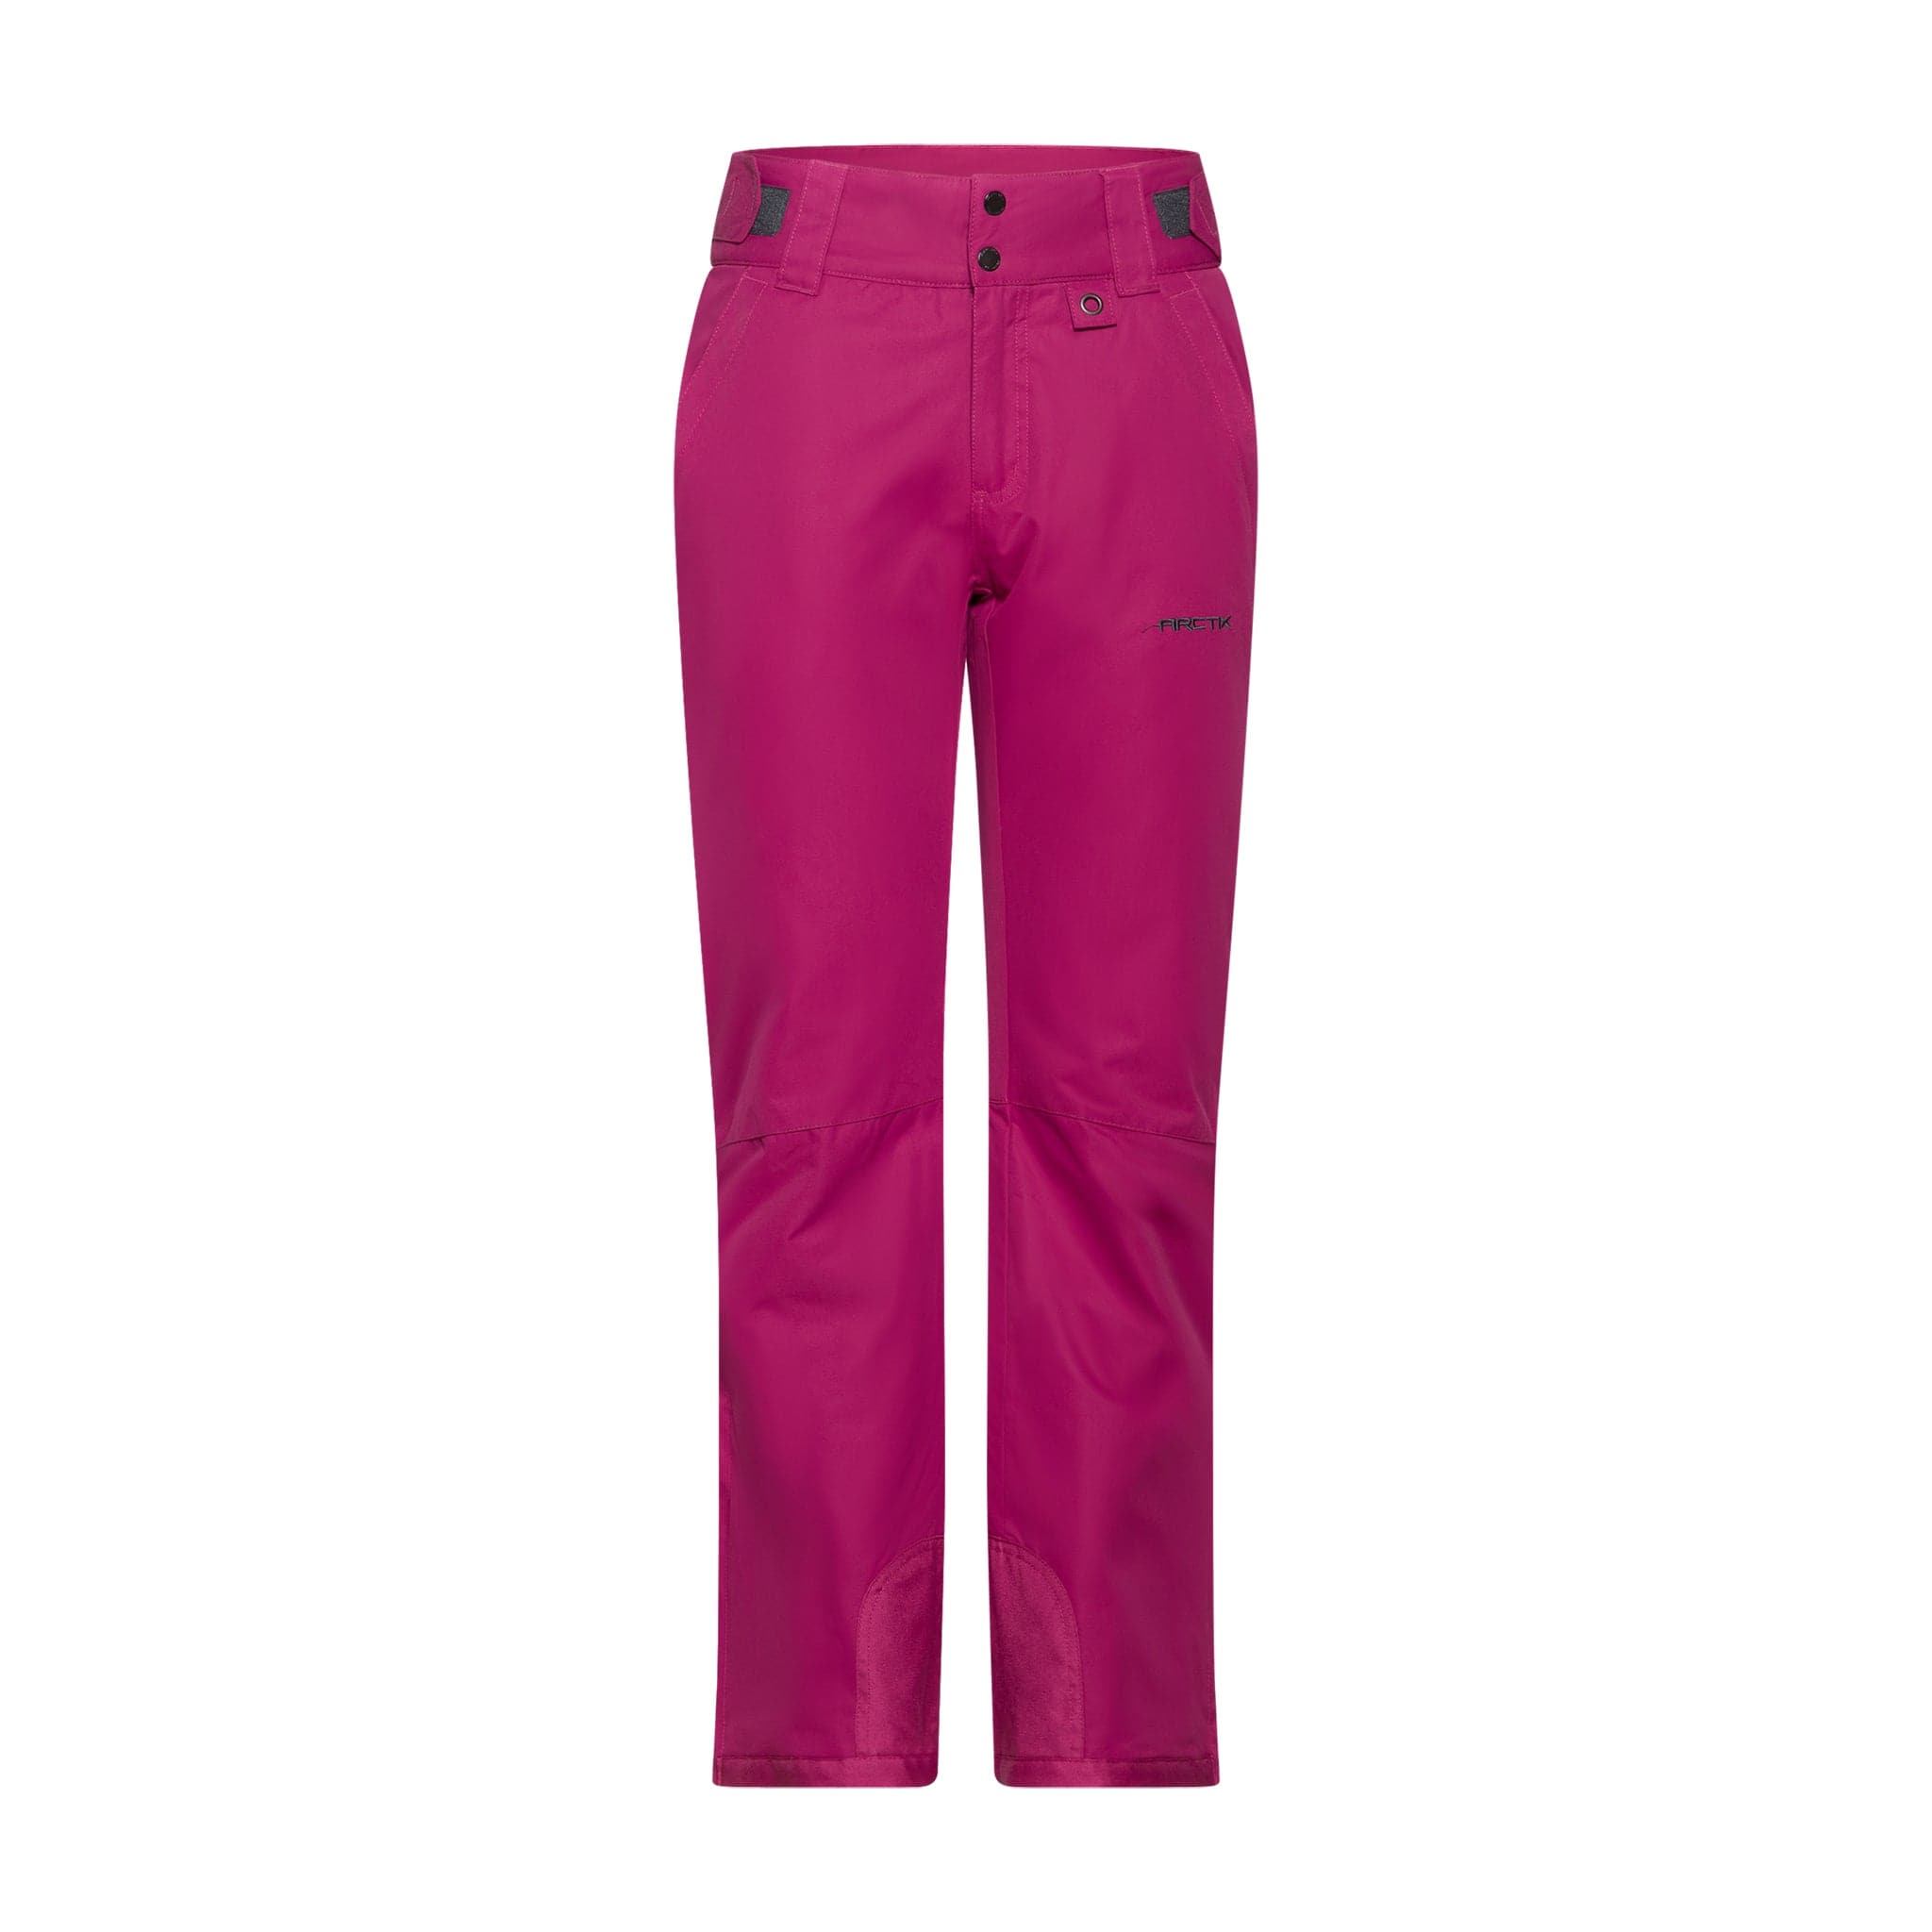 Women's Insulated Snow Pants - Long Inseam-Orchid Fuchsia